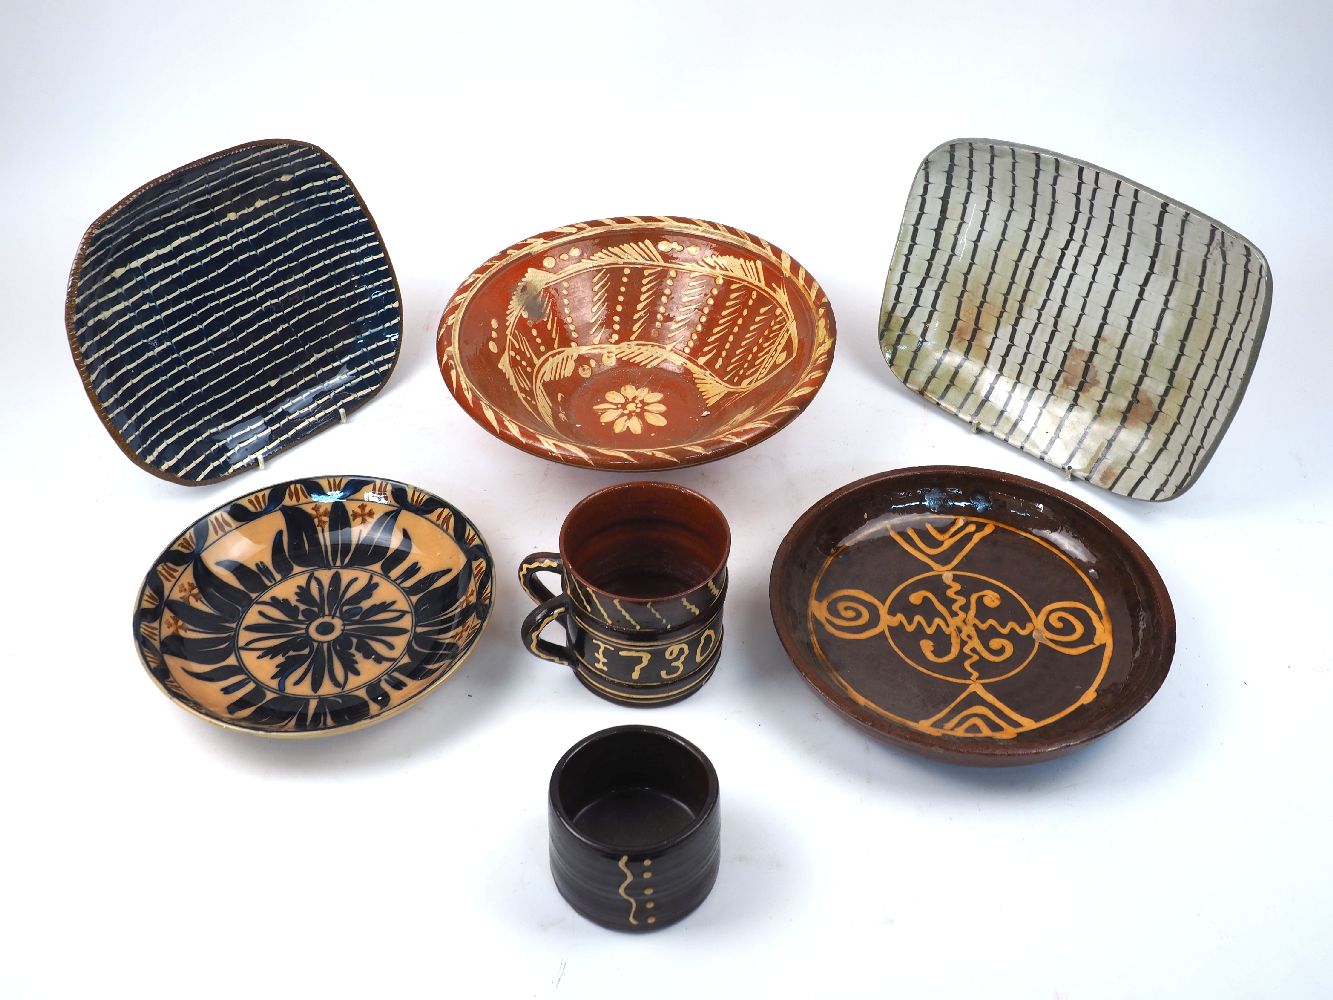 A quantity of slipware and other ceramics, late 19th/20th century, to include; an 18th century-style